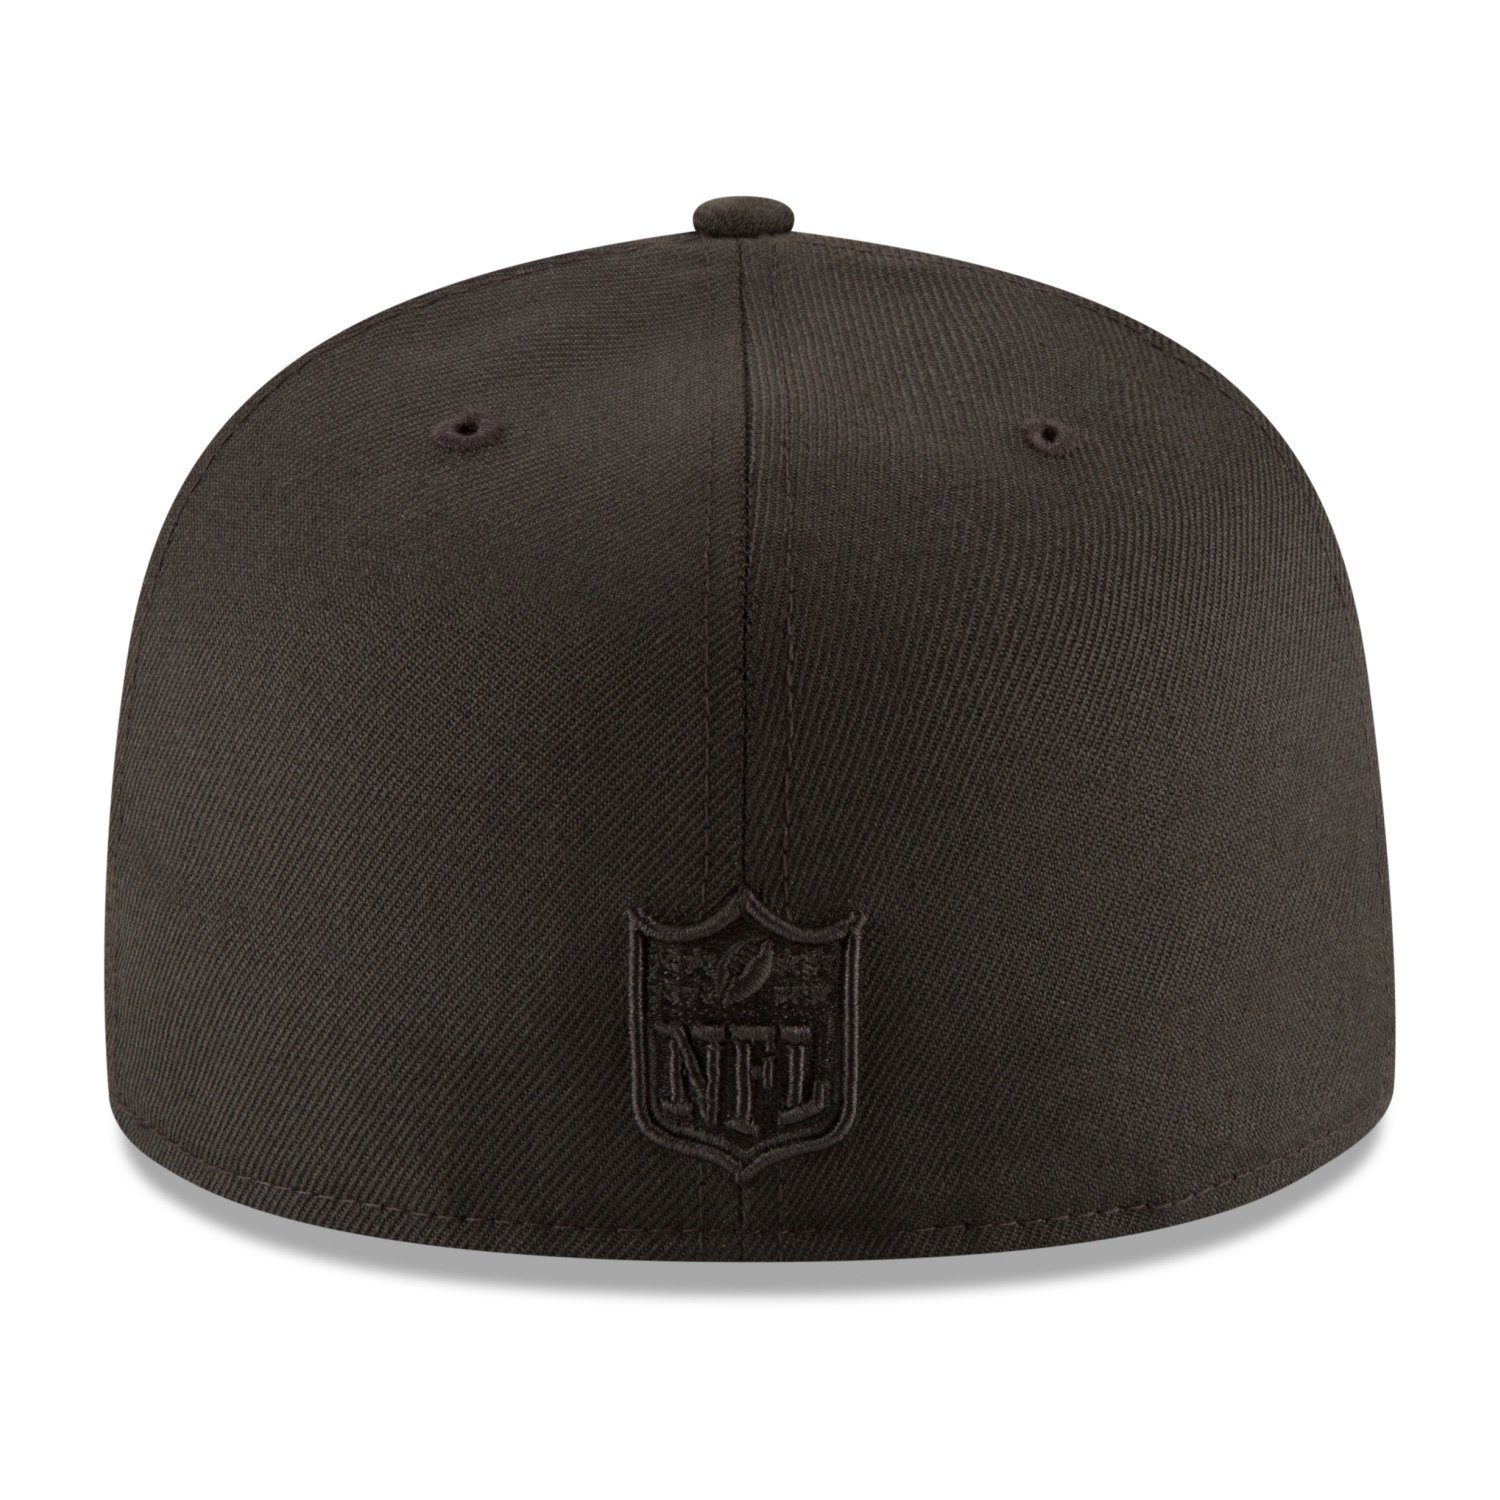 New Cap Orleans Saints NFL 59Fifty Fitted New Era